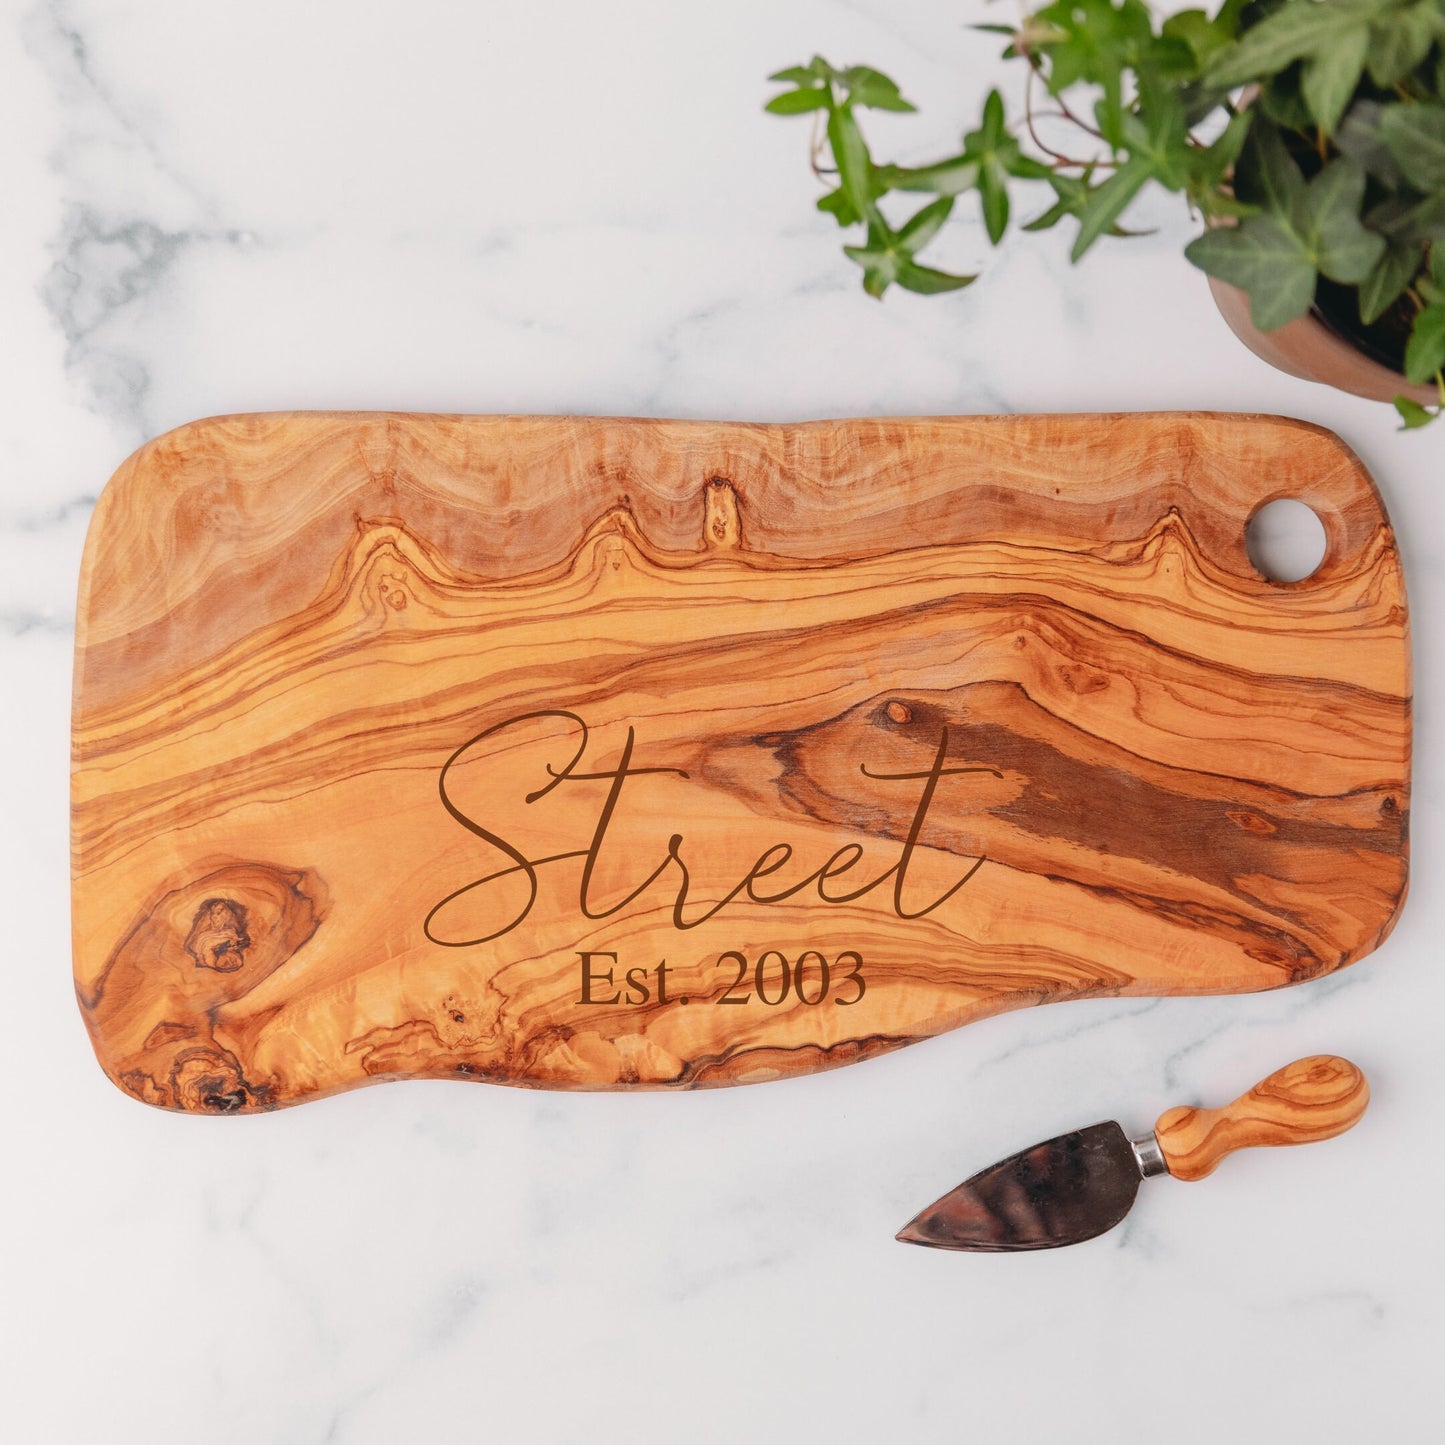 Olive Wood Charcuterie Board and Accessories – Philco Forged